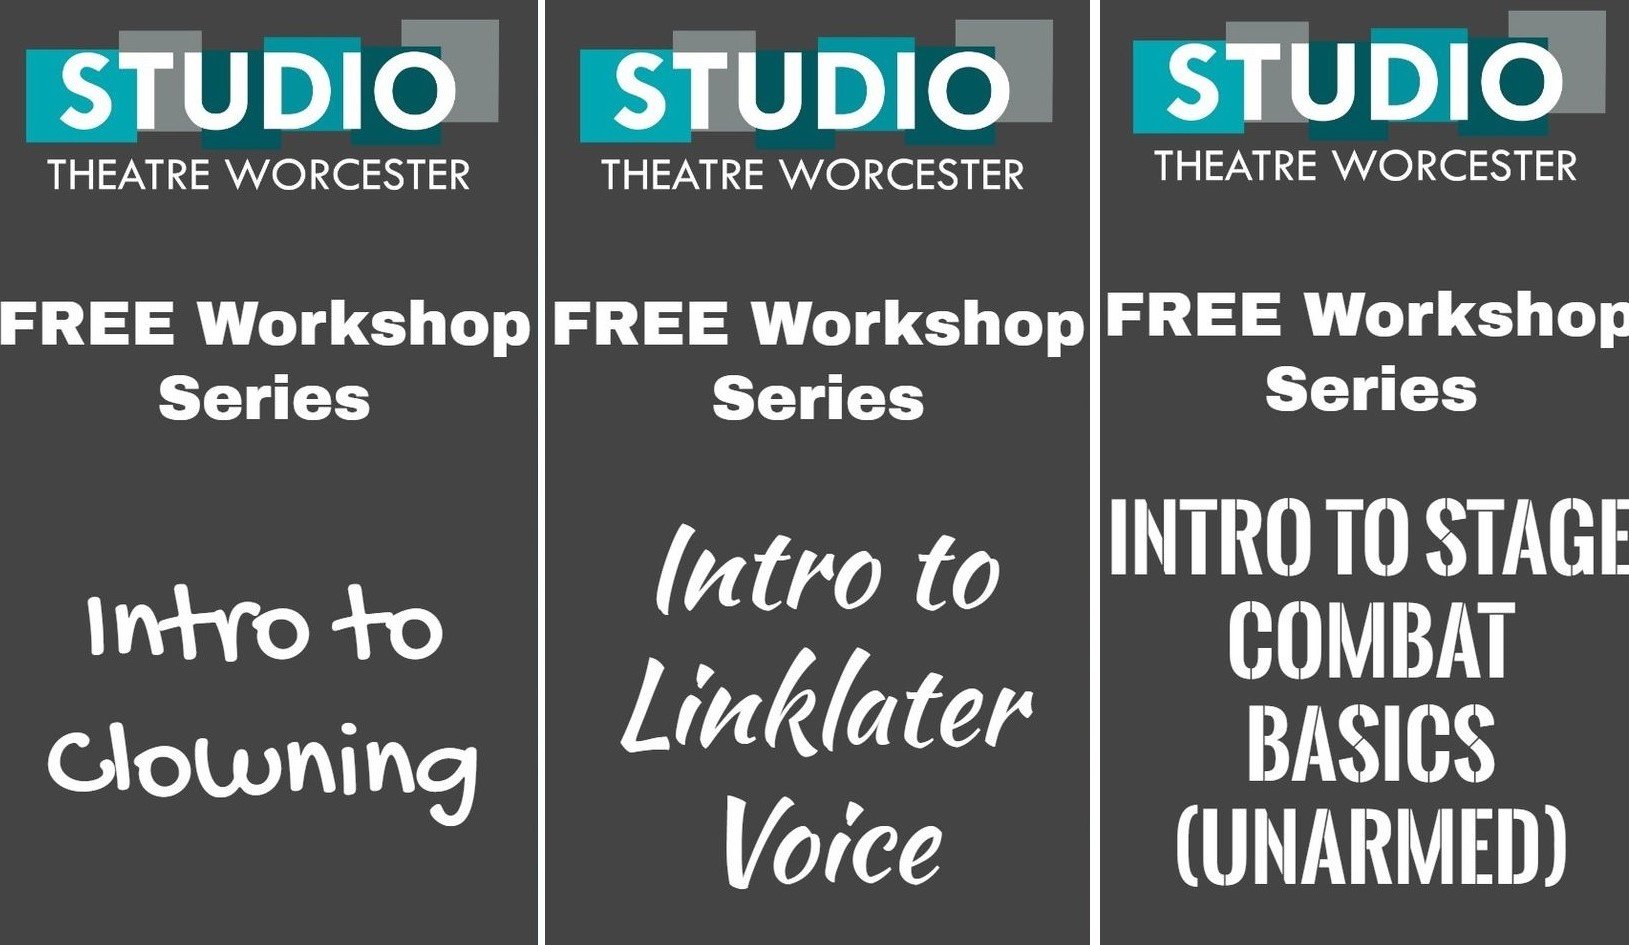 "Intro to Stage Combat, Linklater Voice, Clowning and More" - Specialized Workshop Instruction Available from Studio Theatre Worcester (Worcester, MA.)